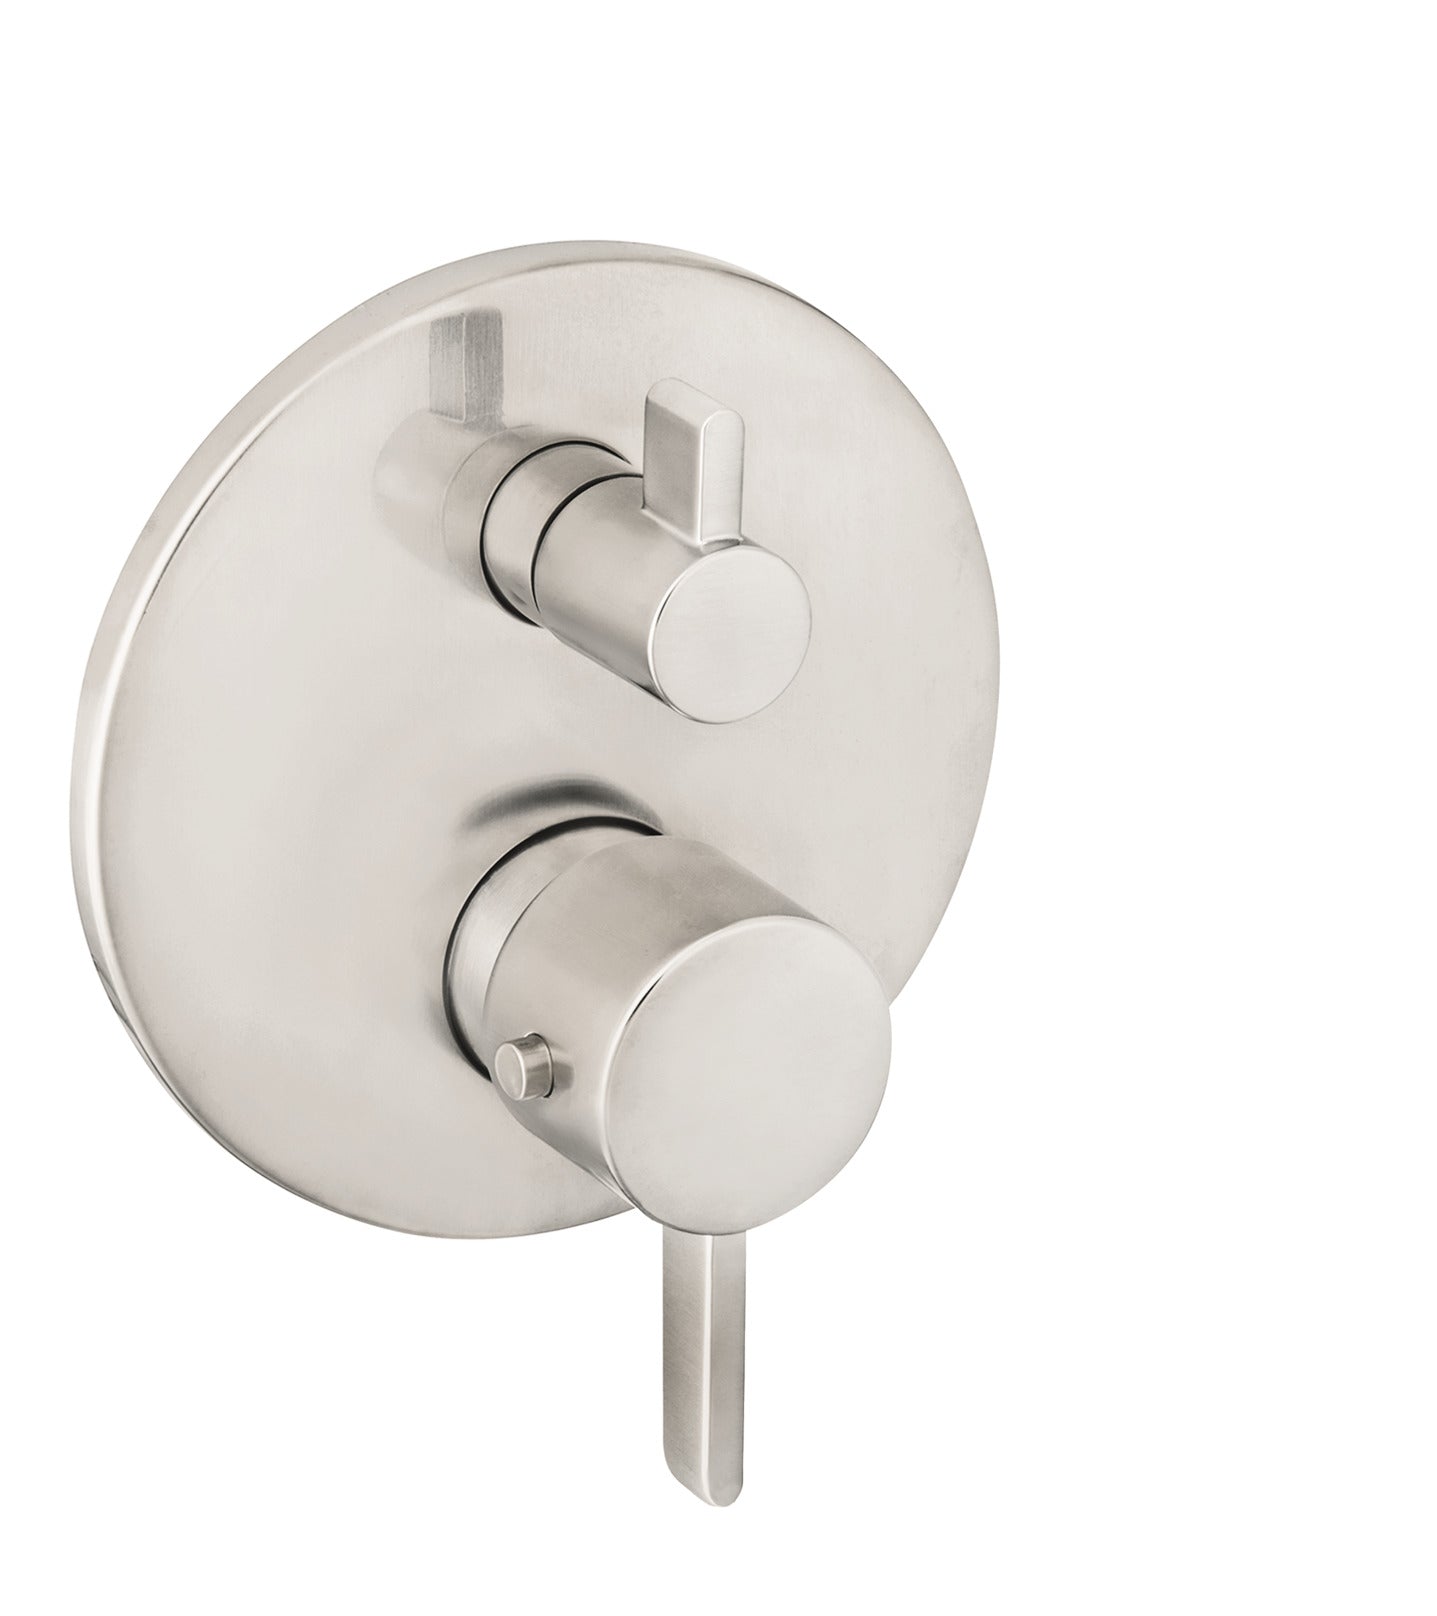 HANSGROHE 04230820 Brushed Nickel Ecostat Modern Thermostatic Trim